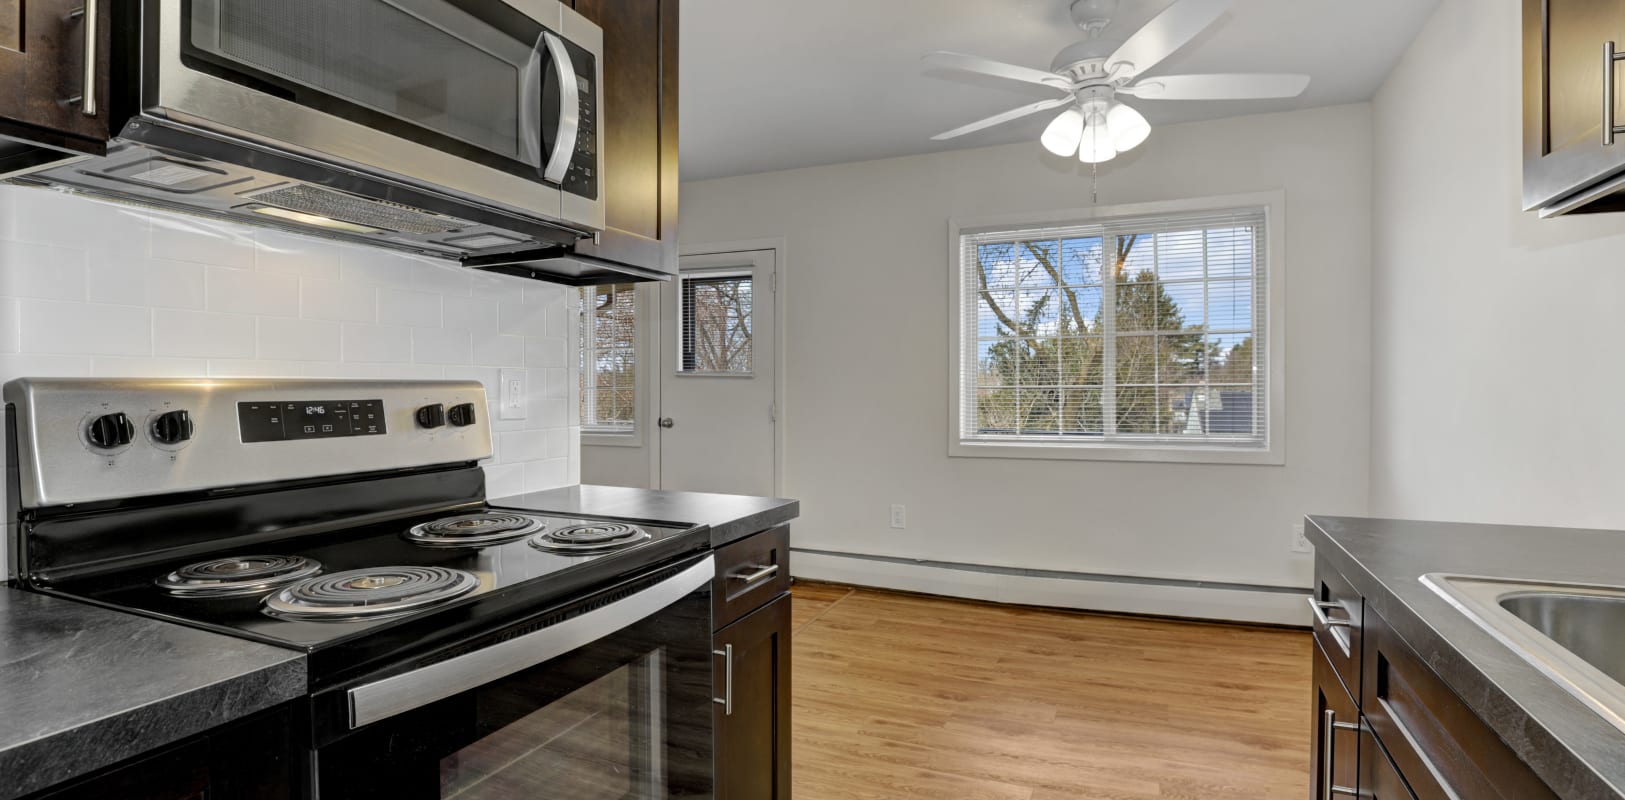 Kitchen with ceiling fan at Versailles Apartments in Ewing, New Jersey